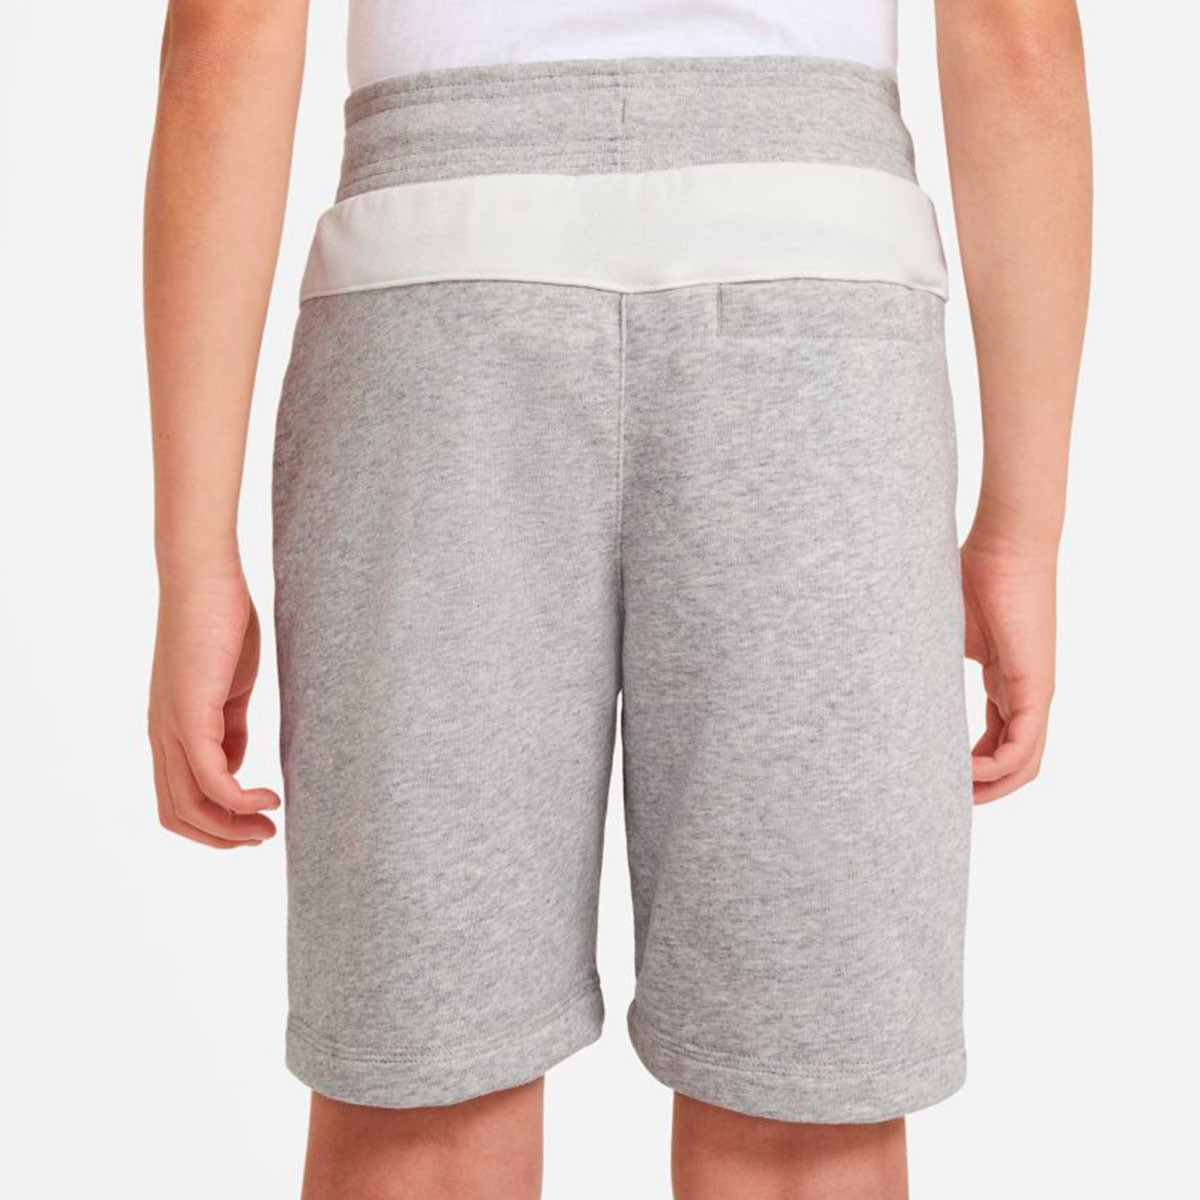 nike french terry shorts grey